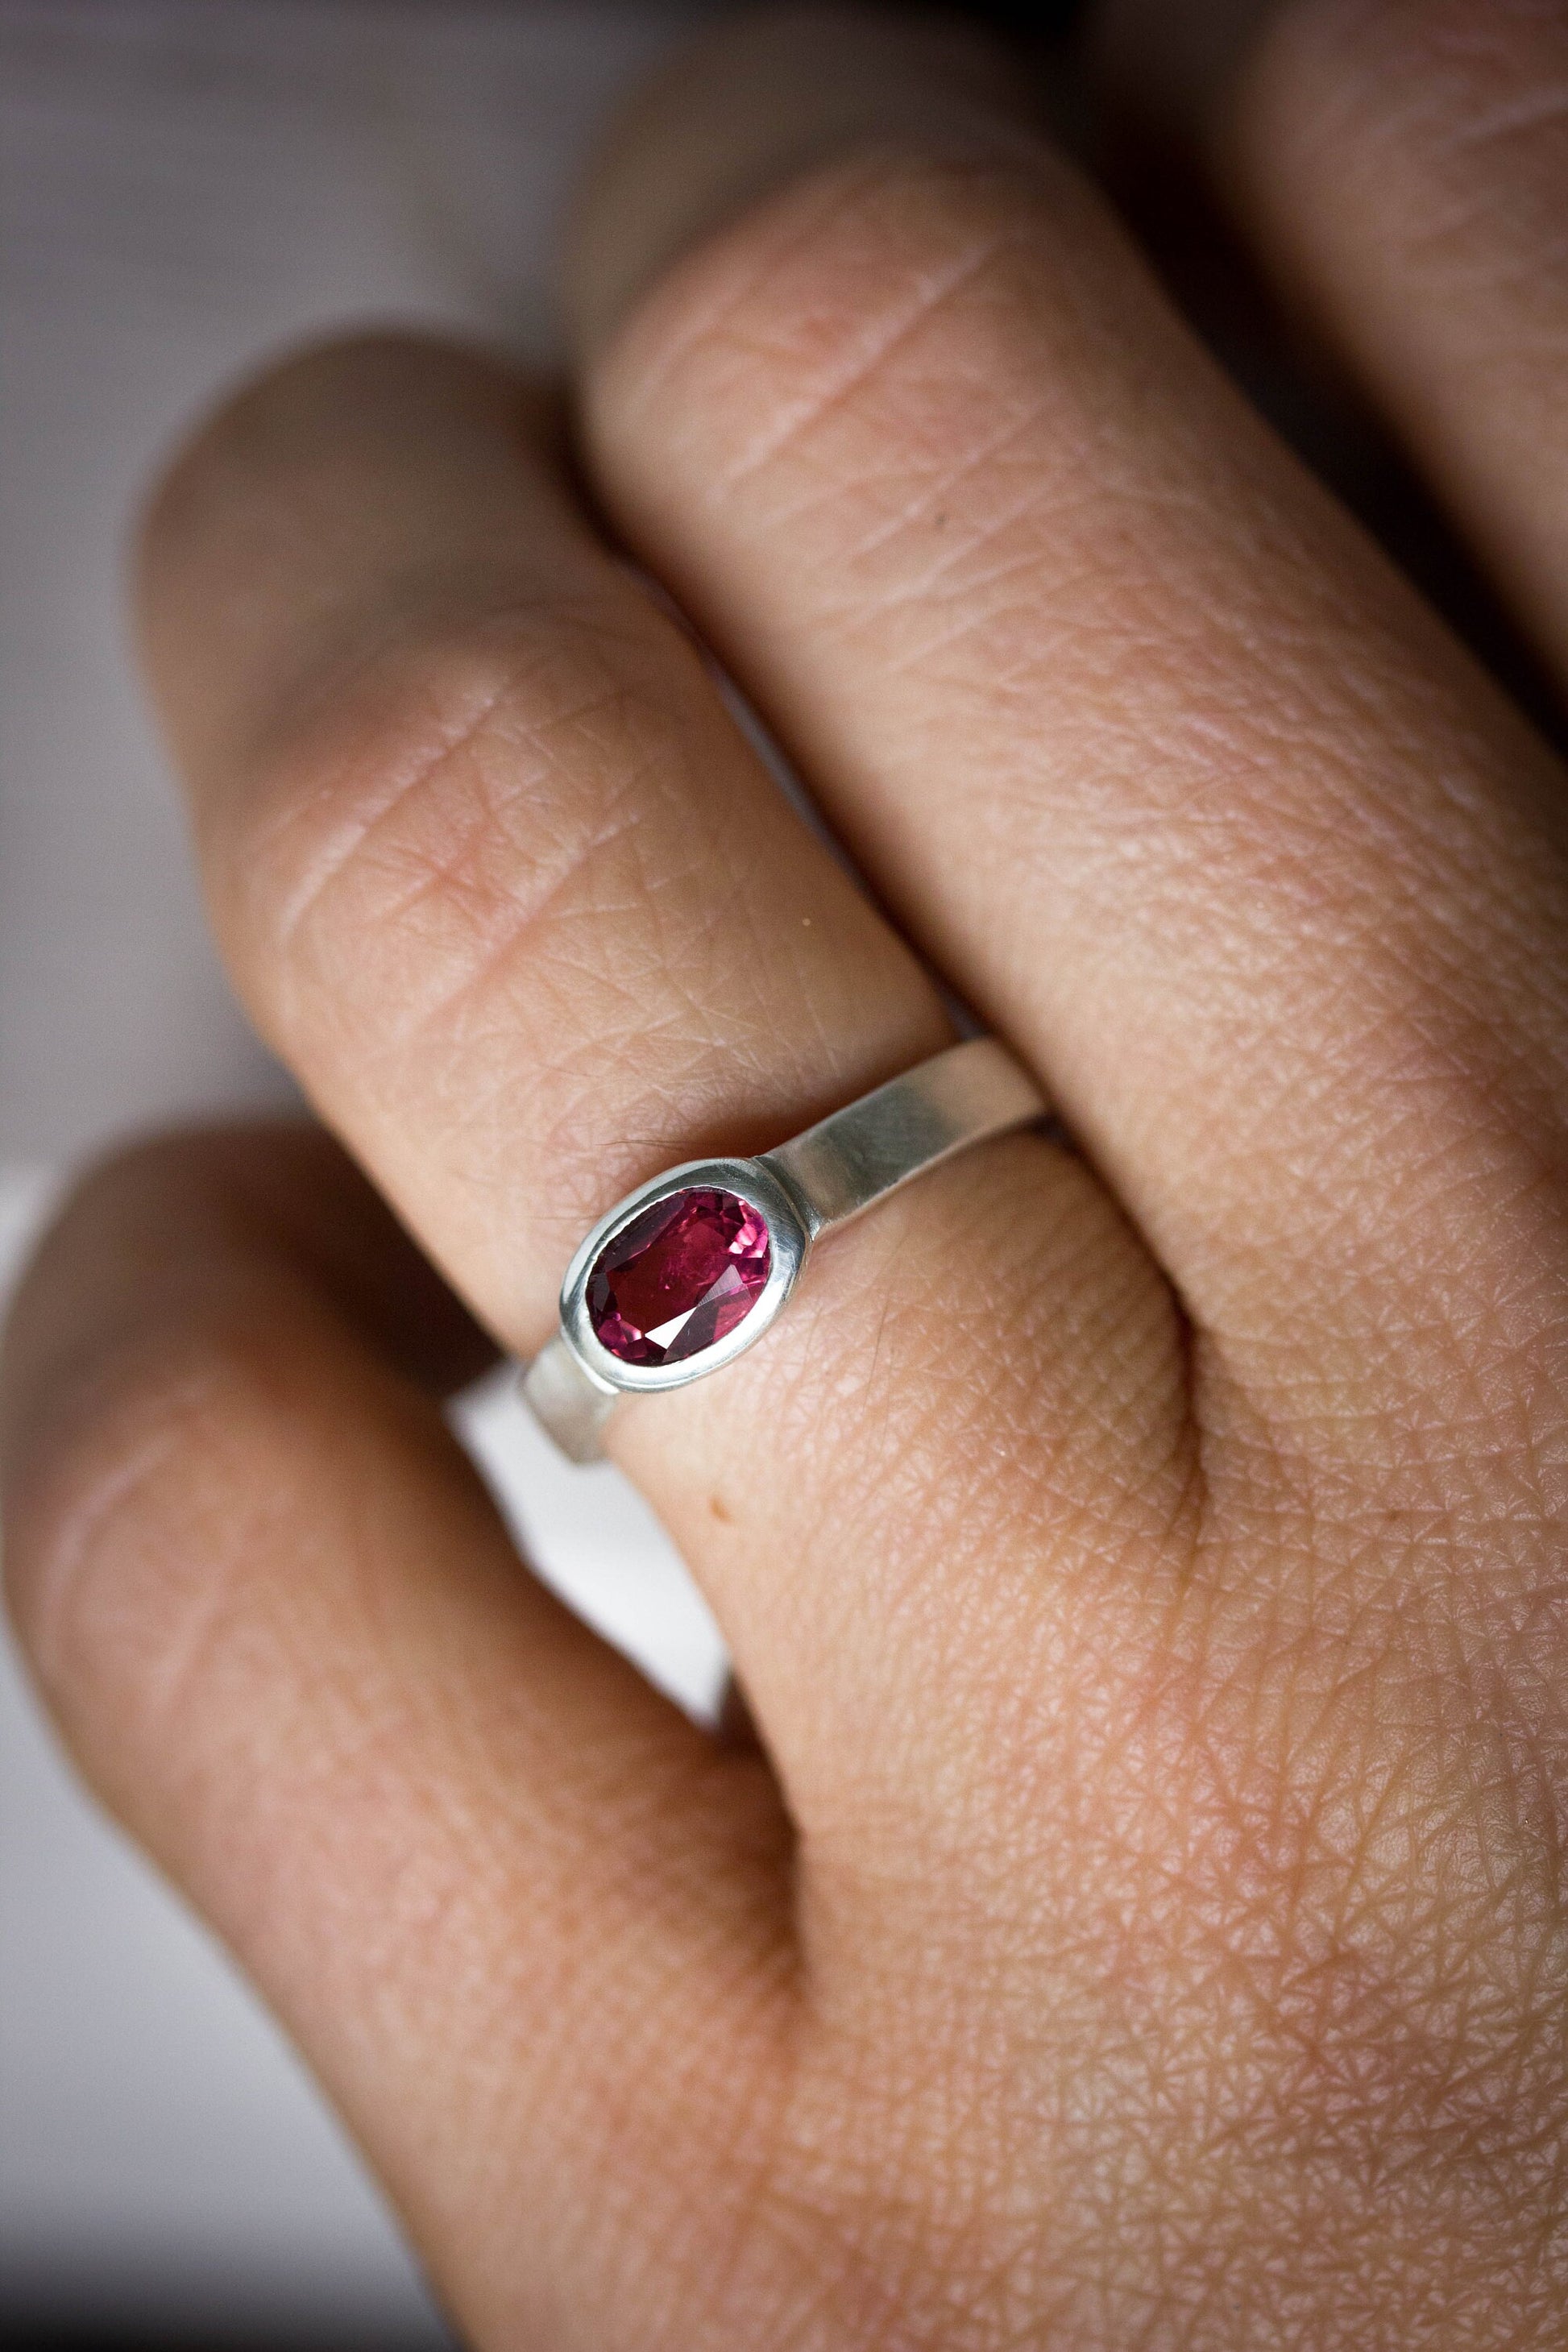 A handmade jewelry: A woman's hand holding a Pink Tourmaline Wide Band Ring, Brushed Silver With Low Profile, Size 7 Oval Gemstone Solitaire and October Birthstone.